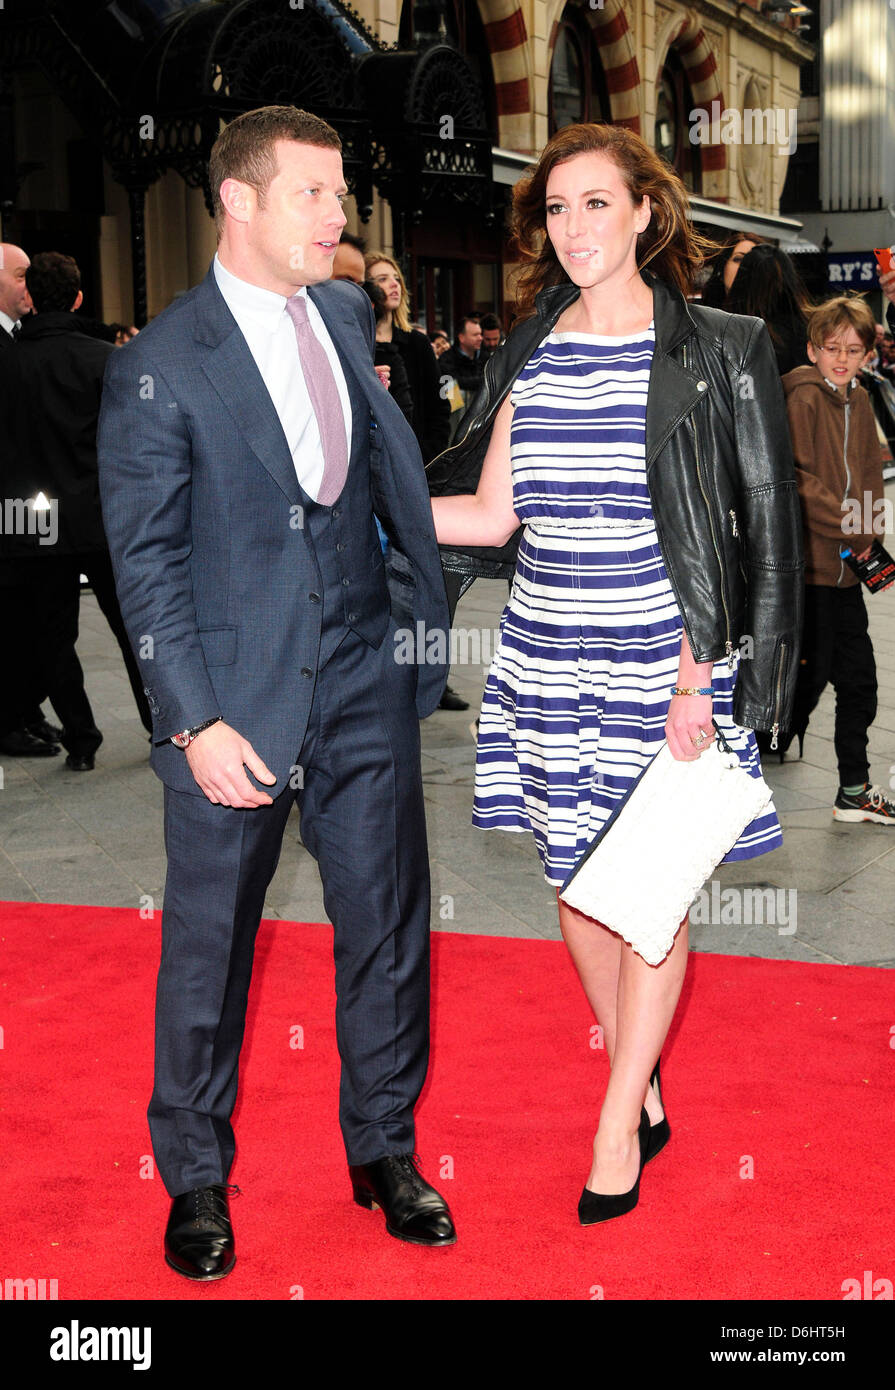 London, UK. 18th April, 2013. Dermot O'Leary; Dee Koppang  attend the Uk Premiere of Iron Man 3  Odeon Leicester Square London. Stock Photo